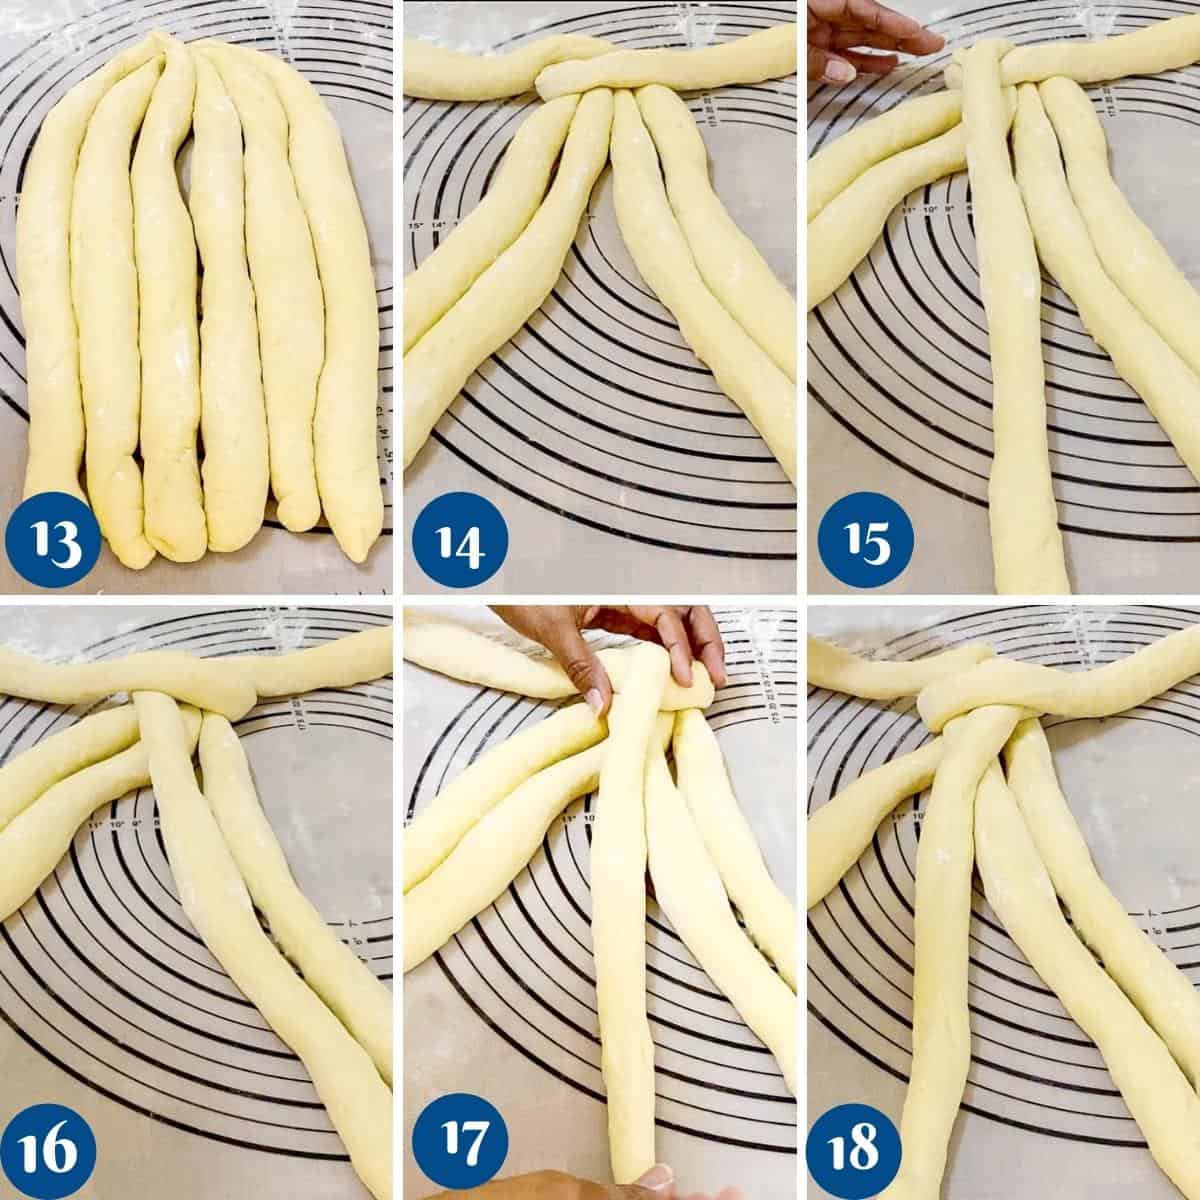 Progress pictures collage for braided sandwich challah.